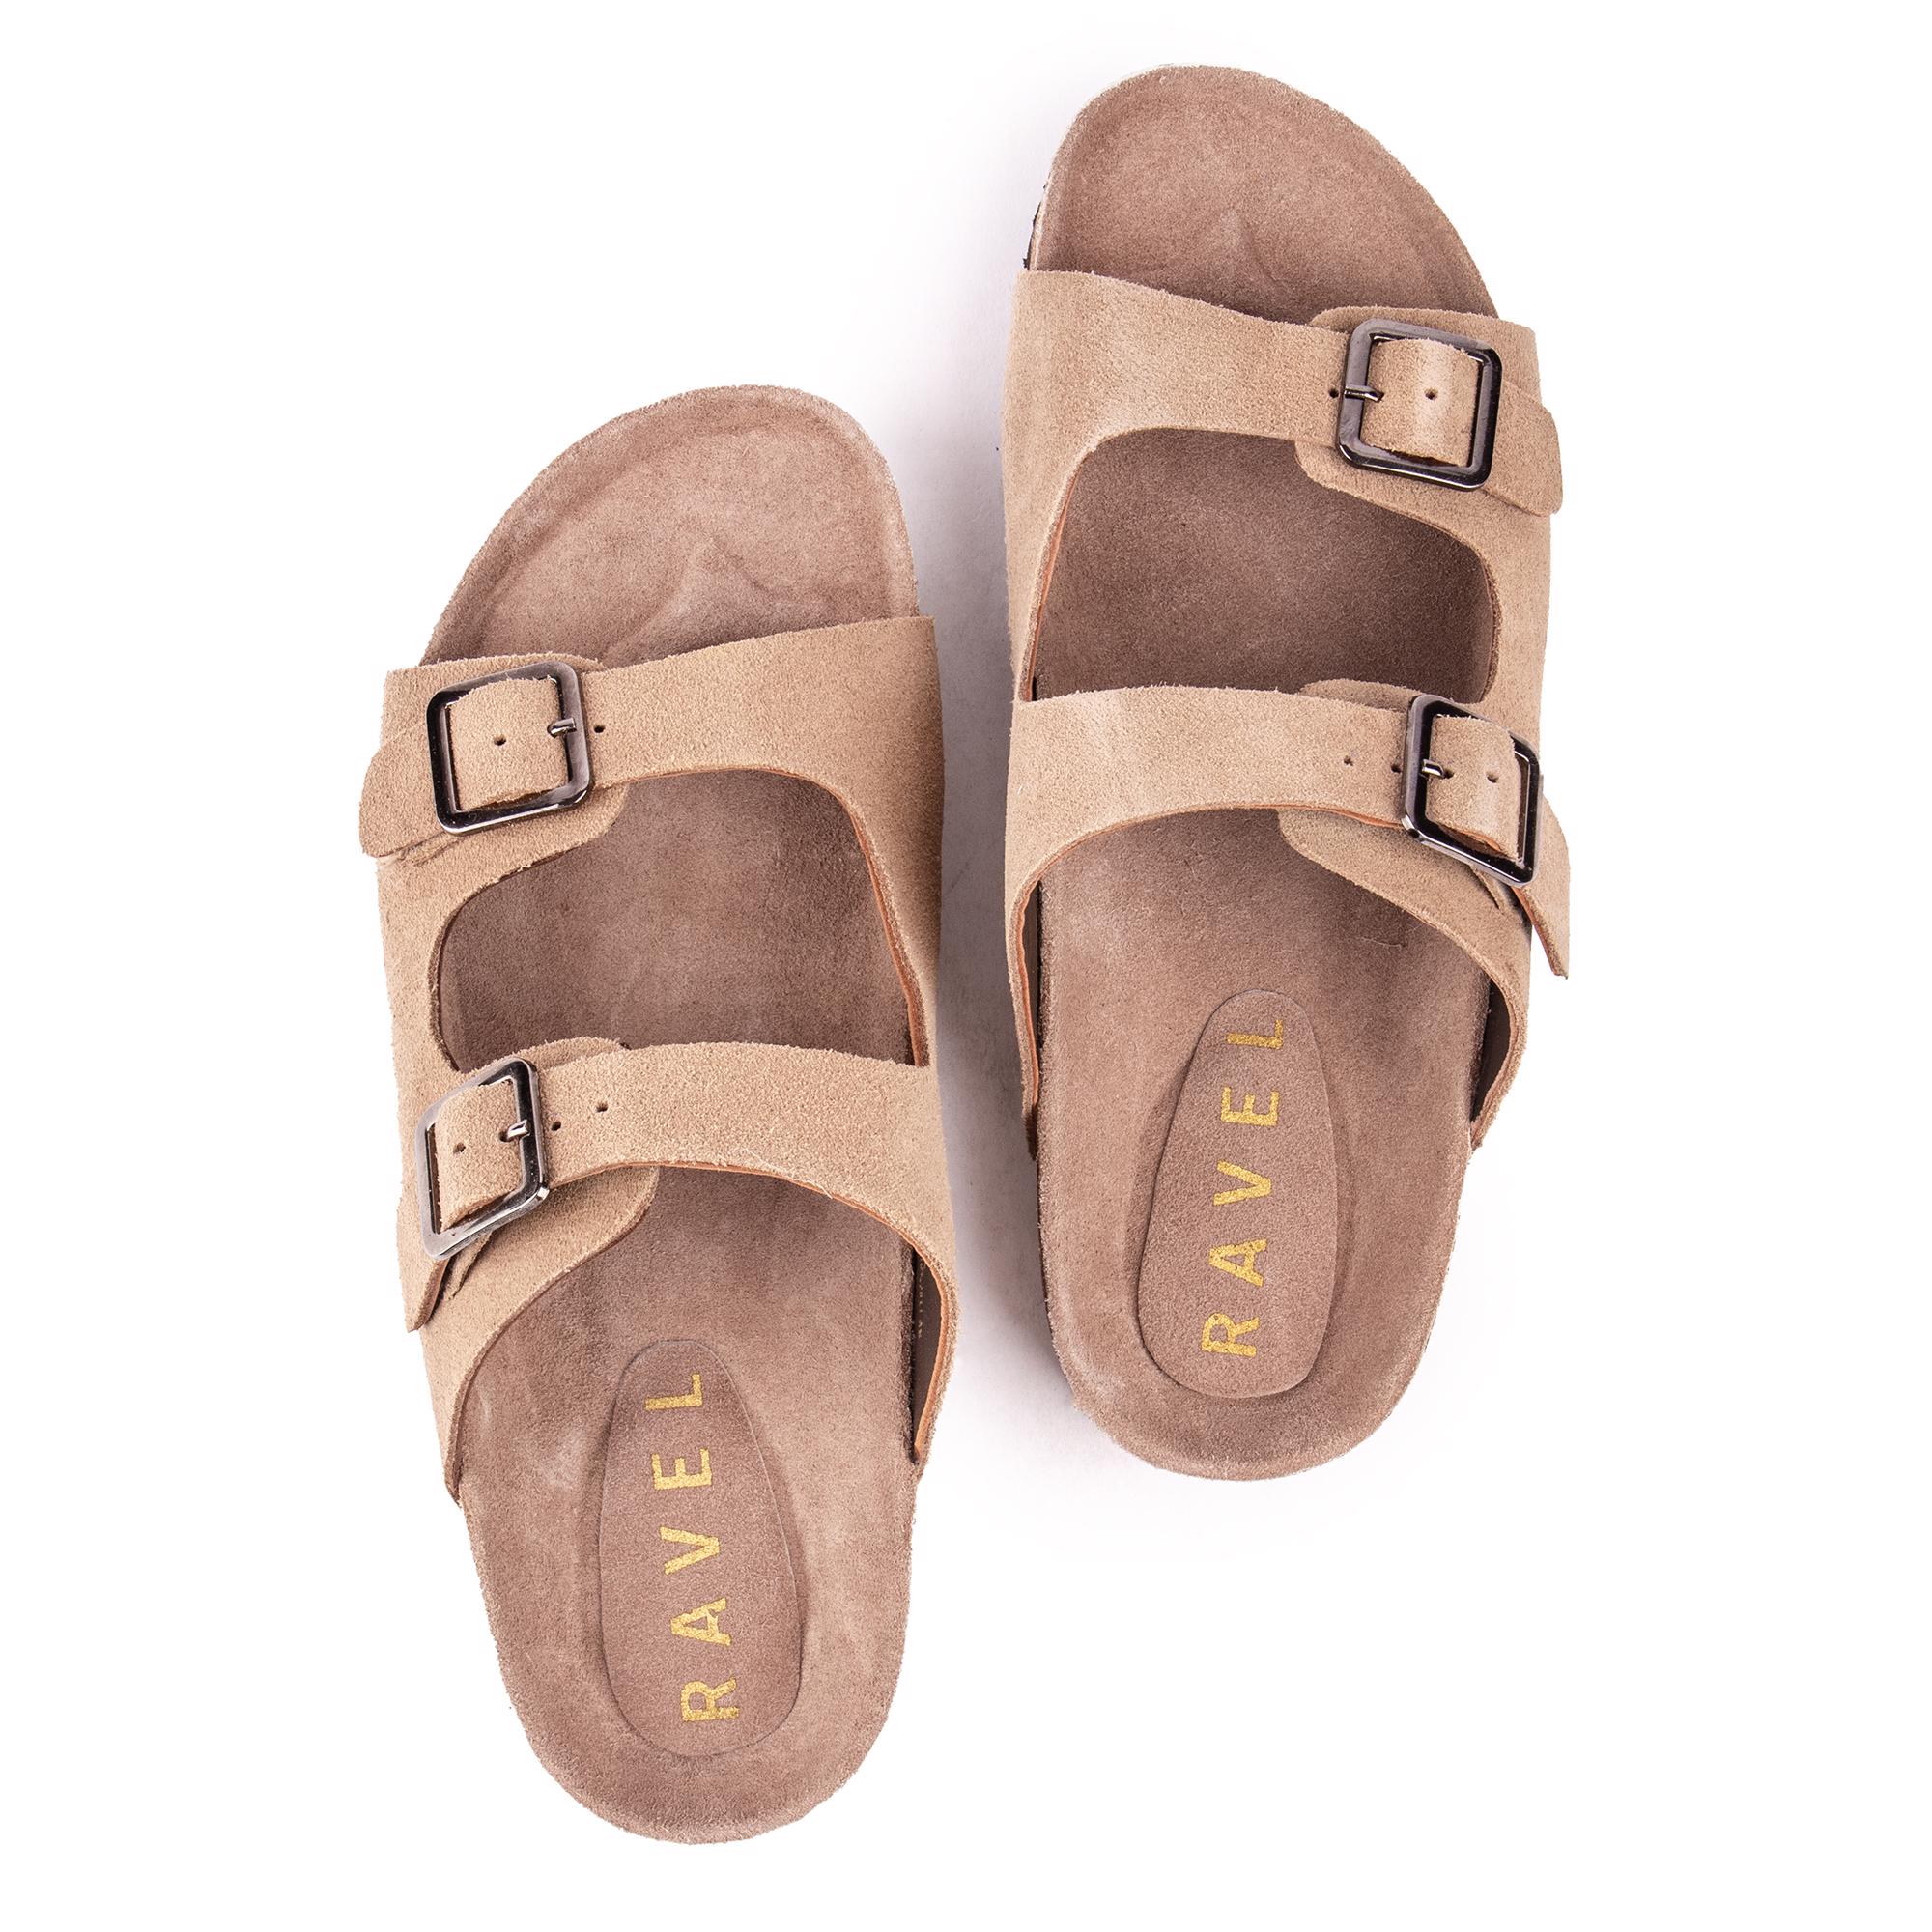 RAVEL Womens Metis Flats Sandals Taupe